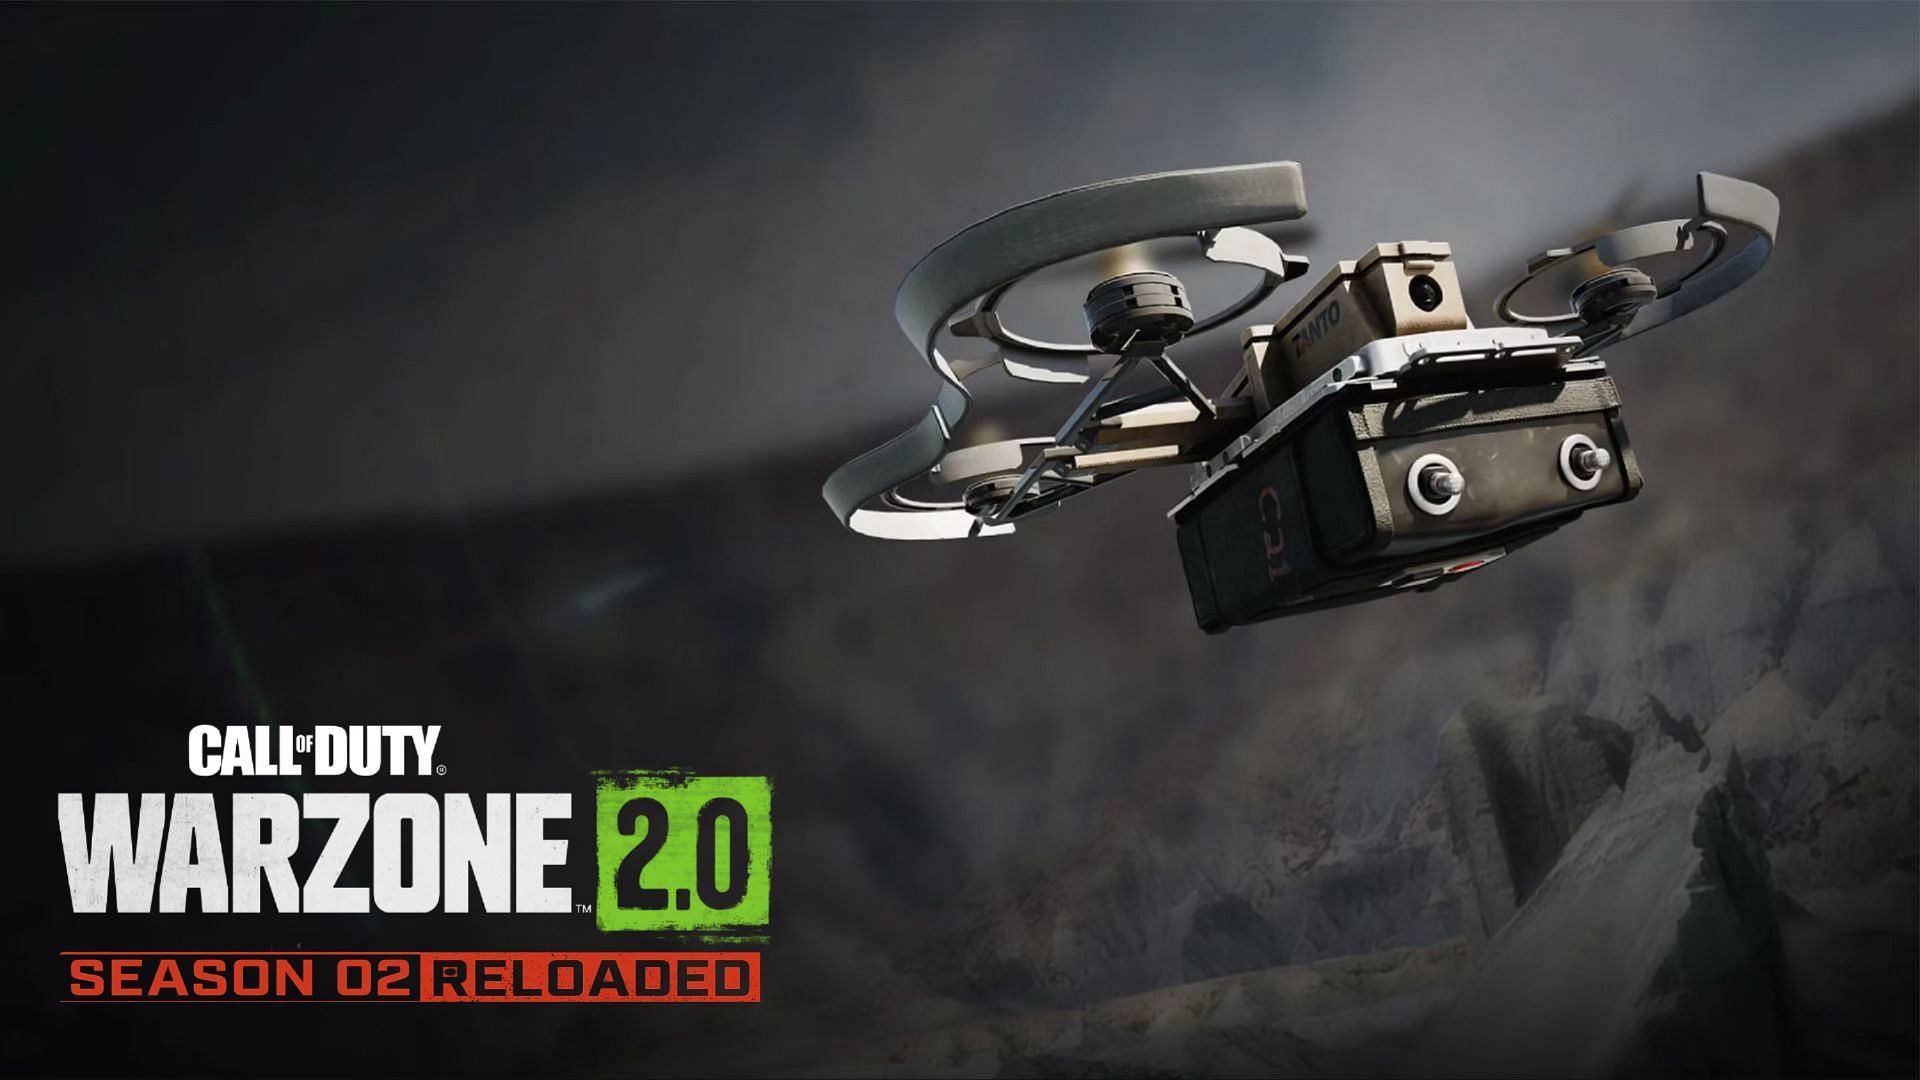 Removal of Bomb Drones in Warzone 2 Season 2 Reloaded (Image via Activision)